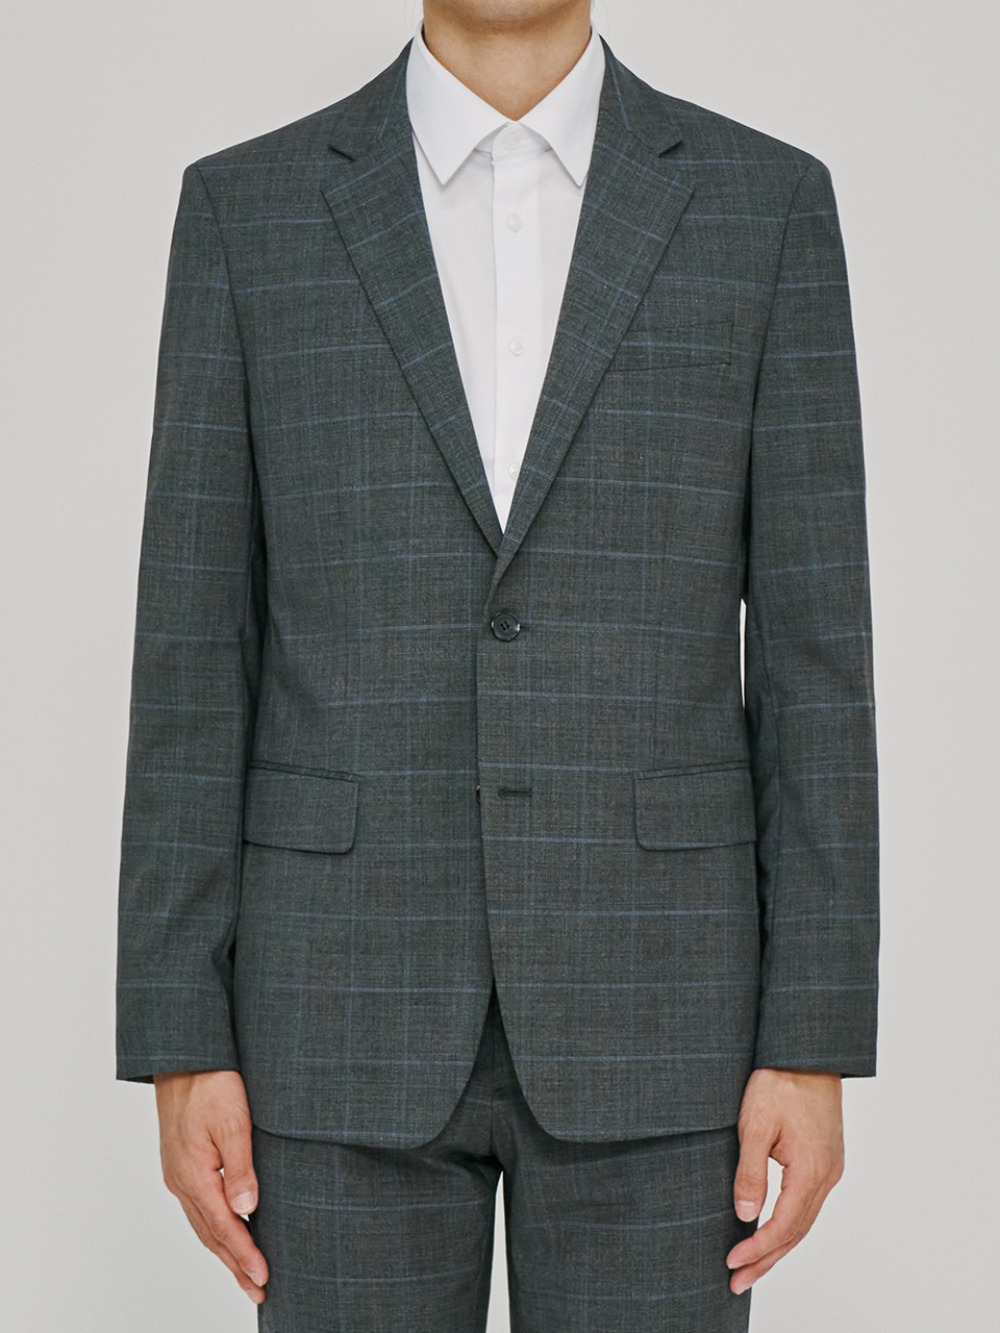 WOOL BLEND SUIT JACKET GREY CHECK